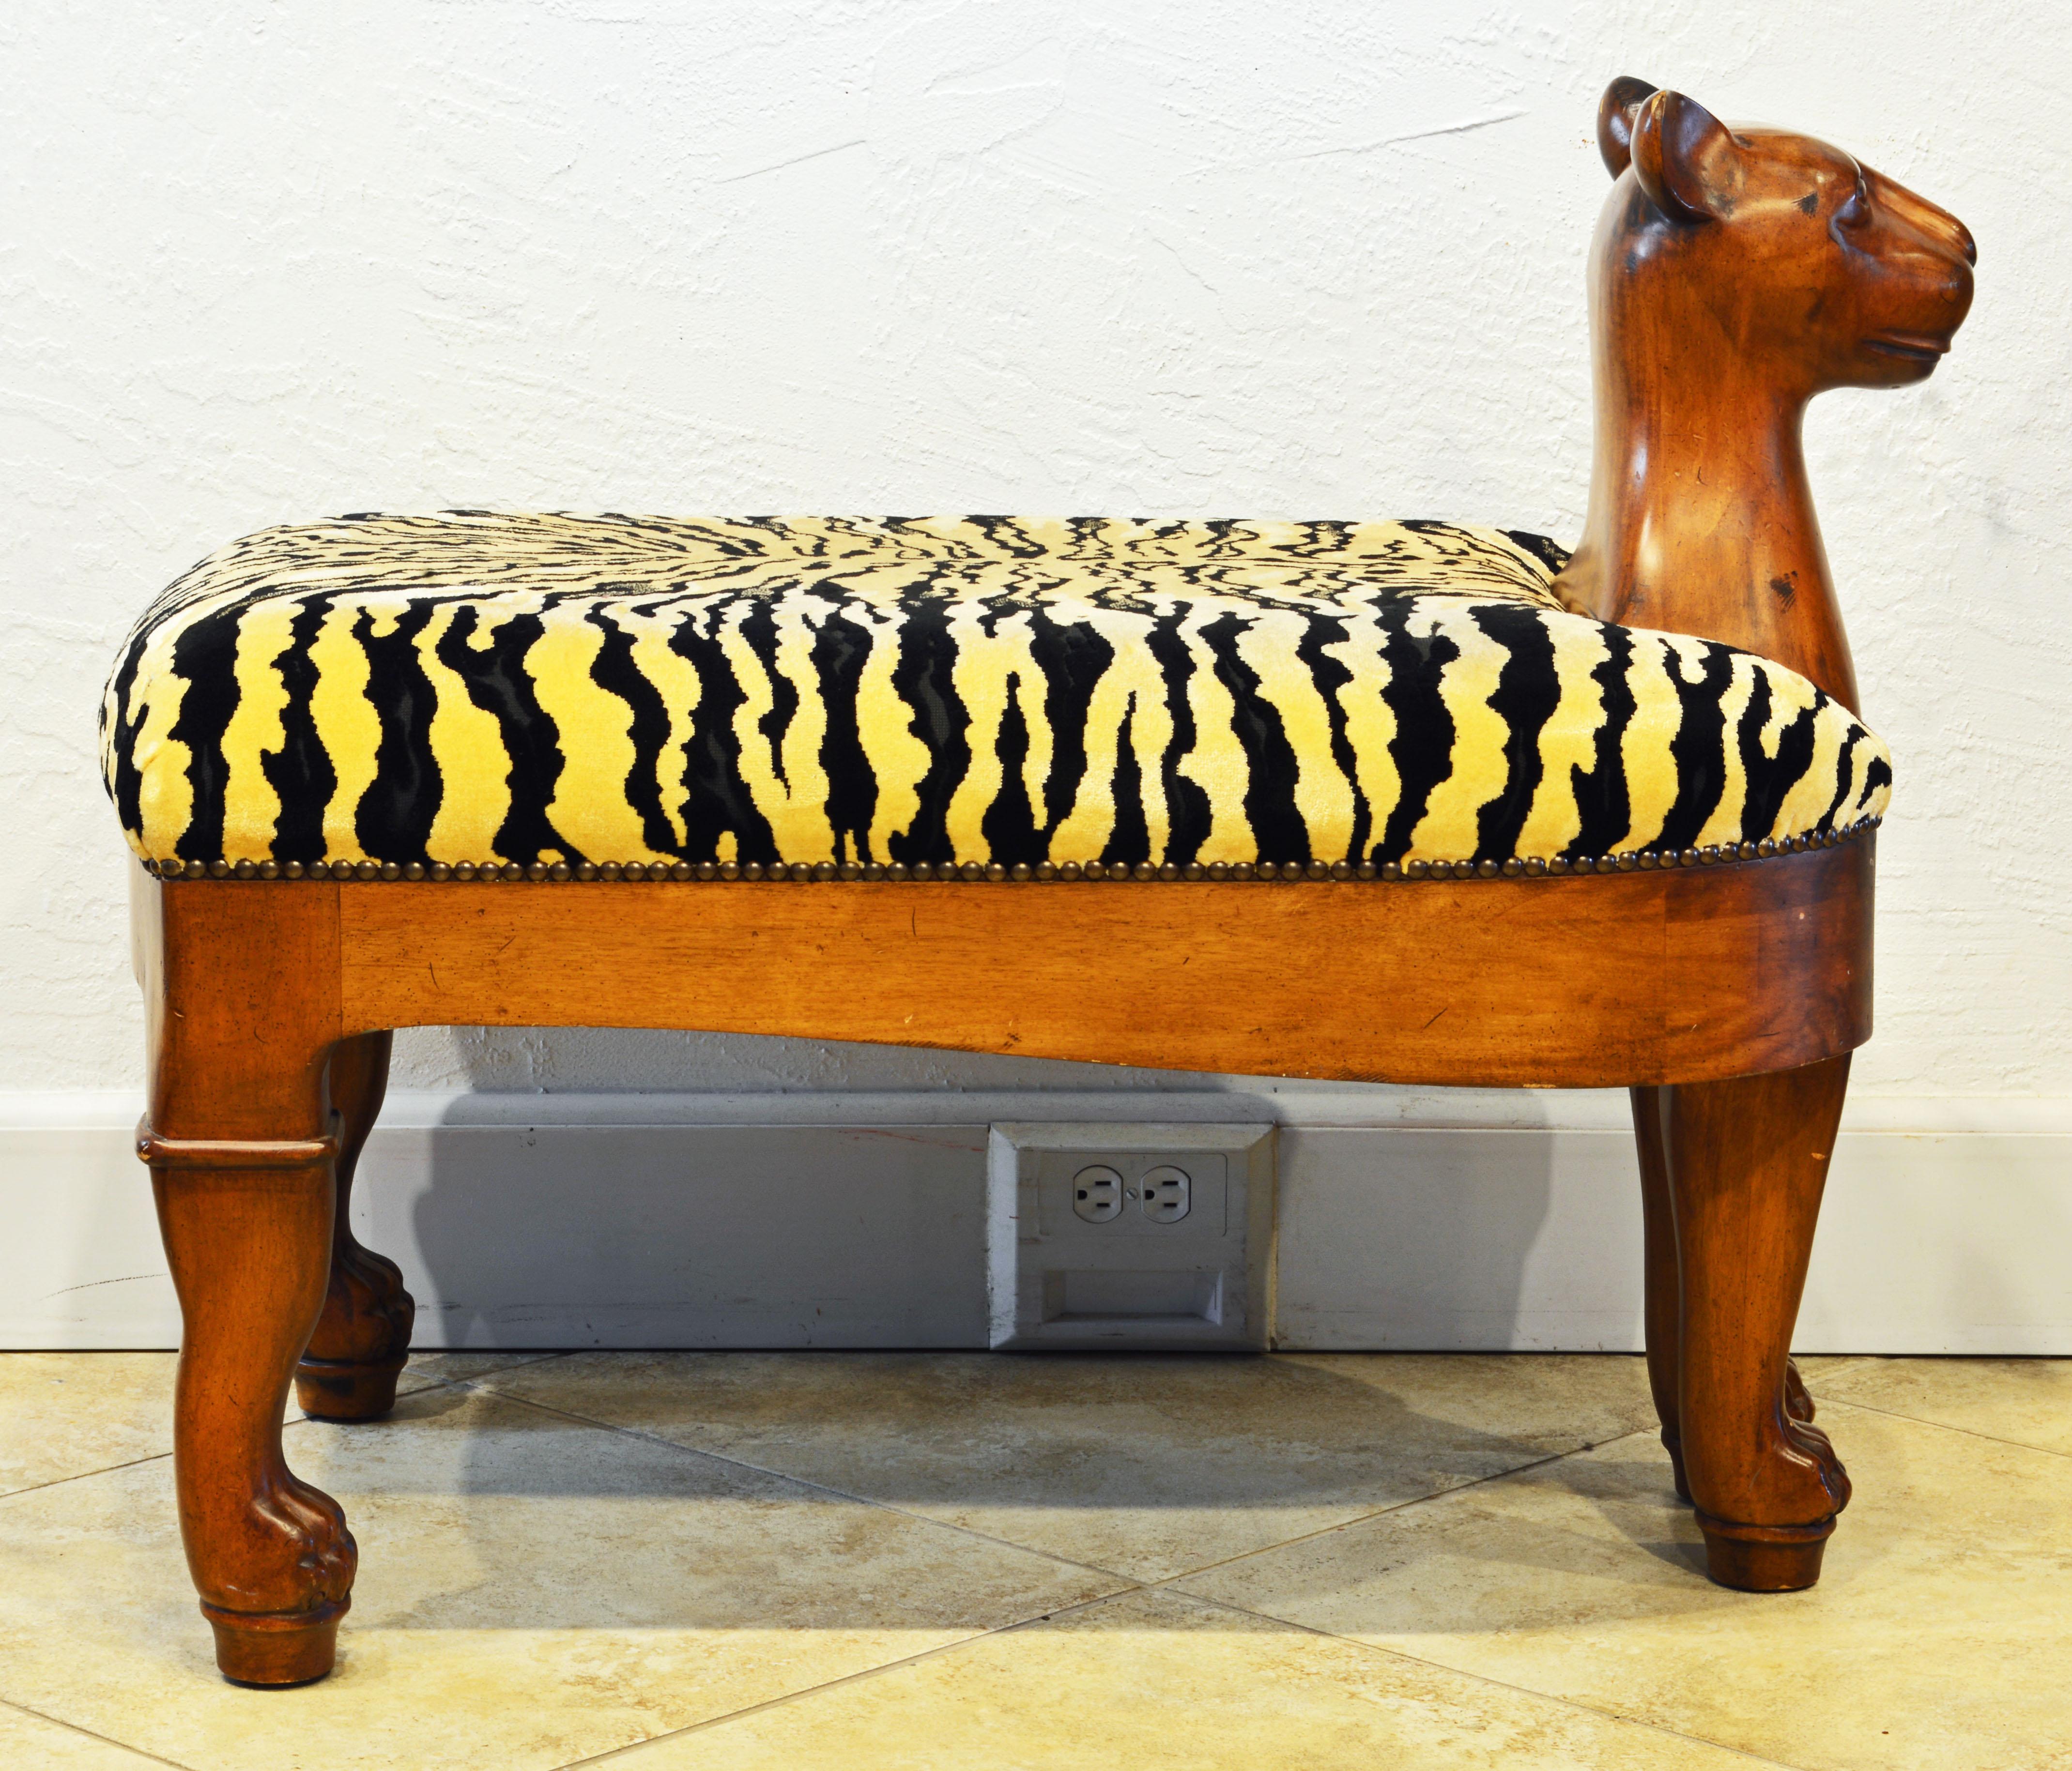 This unusual bench likely dates to the 1980s. It features a stylized lion in the Egyptian style supporting an upholstered seat covered with tiger print fabric.